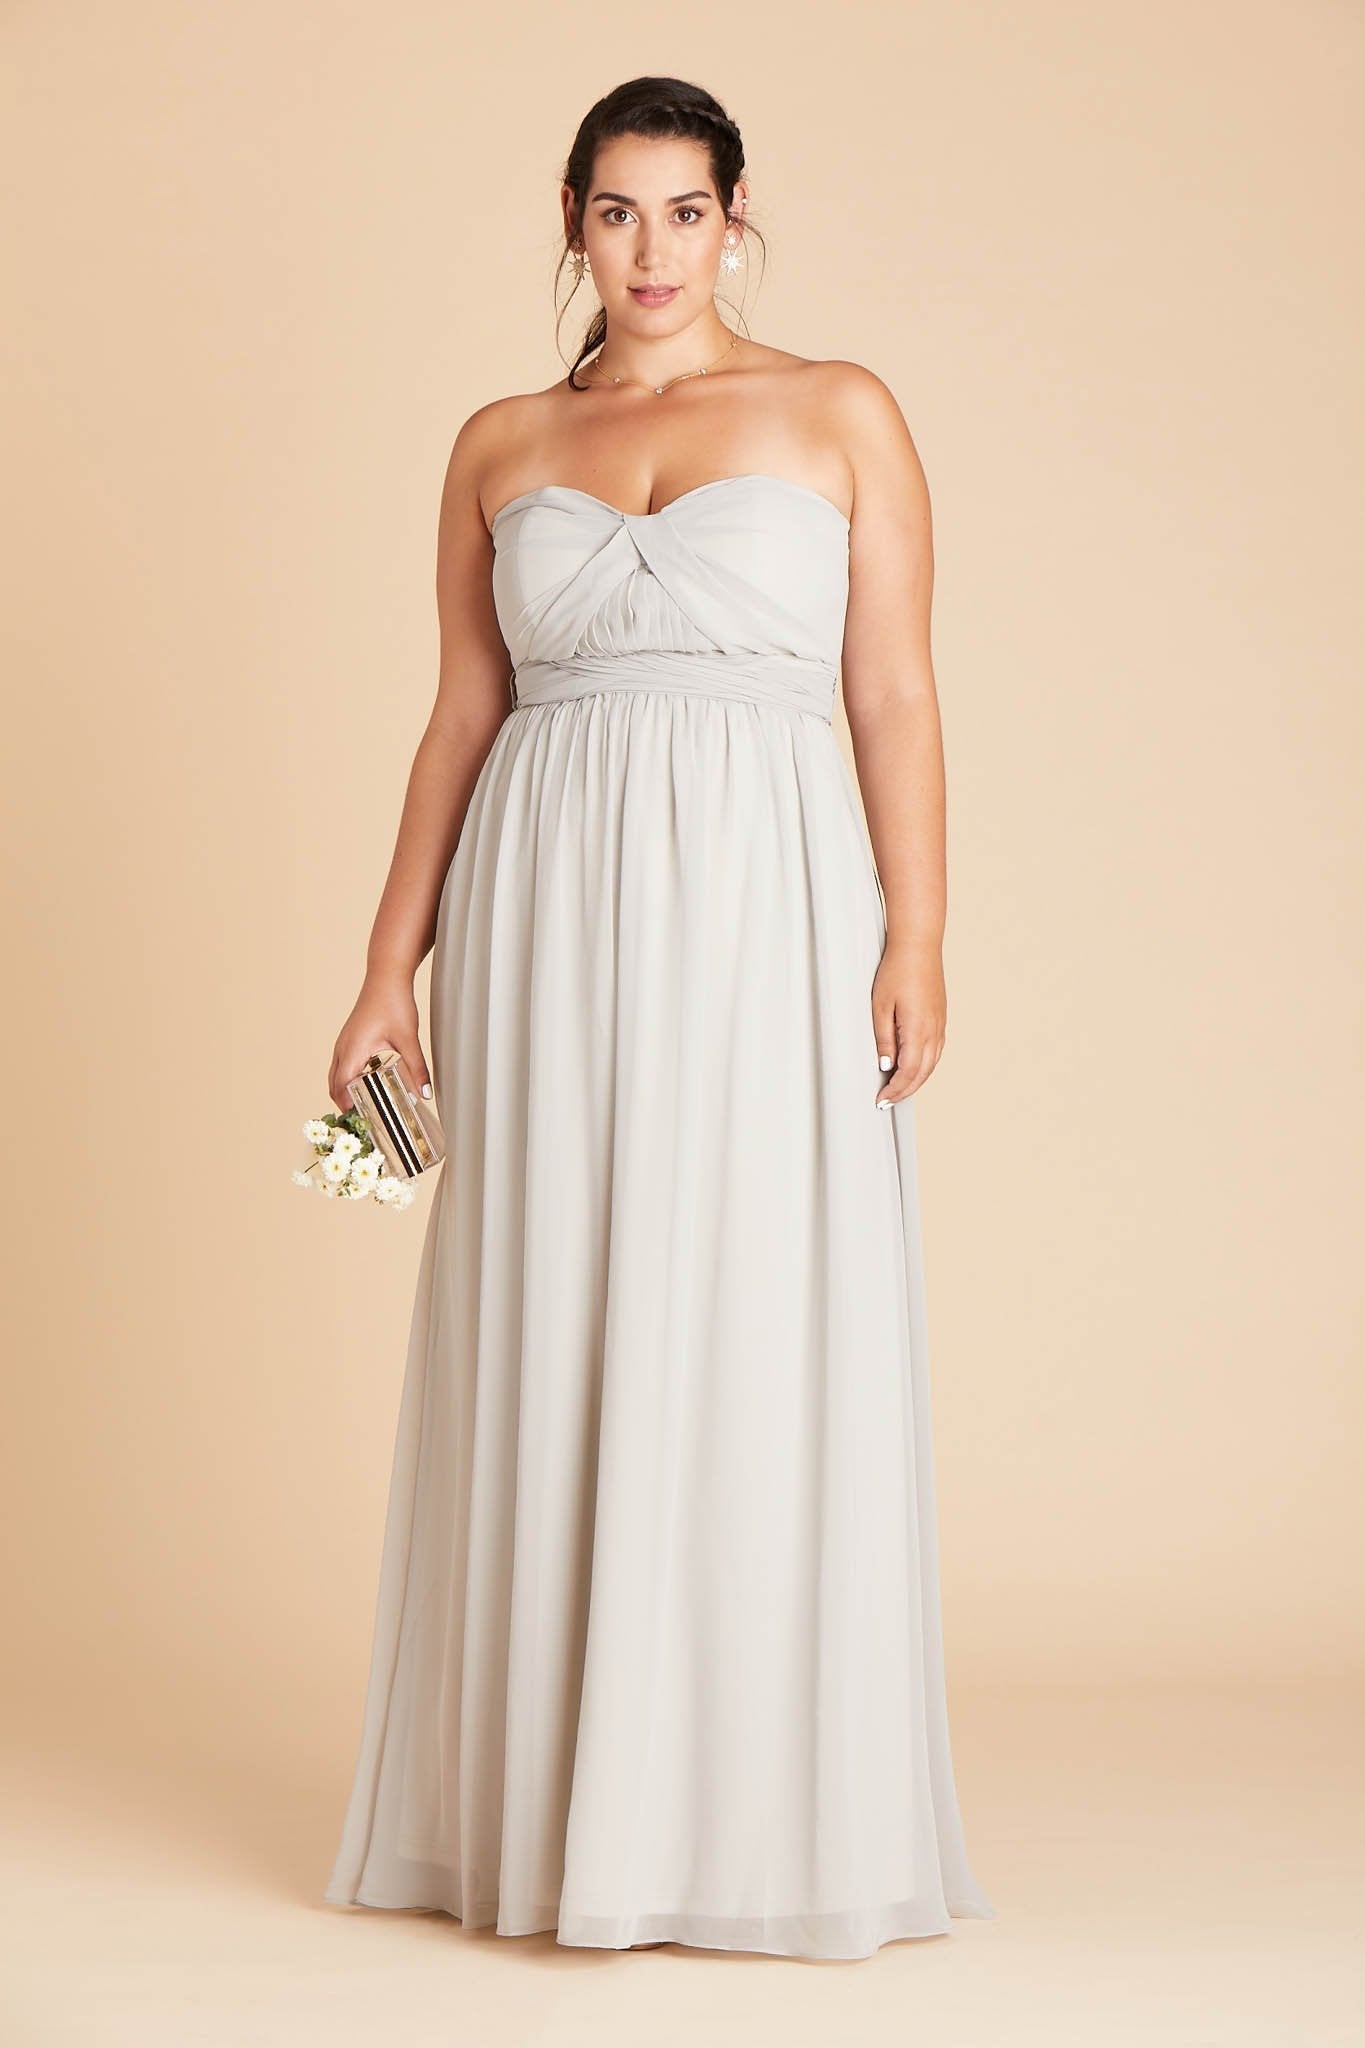 Grace convertible plus size bridesmaid dress in dove gray chiffon by Birdy Grey, front view